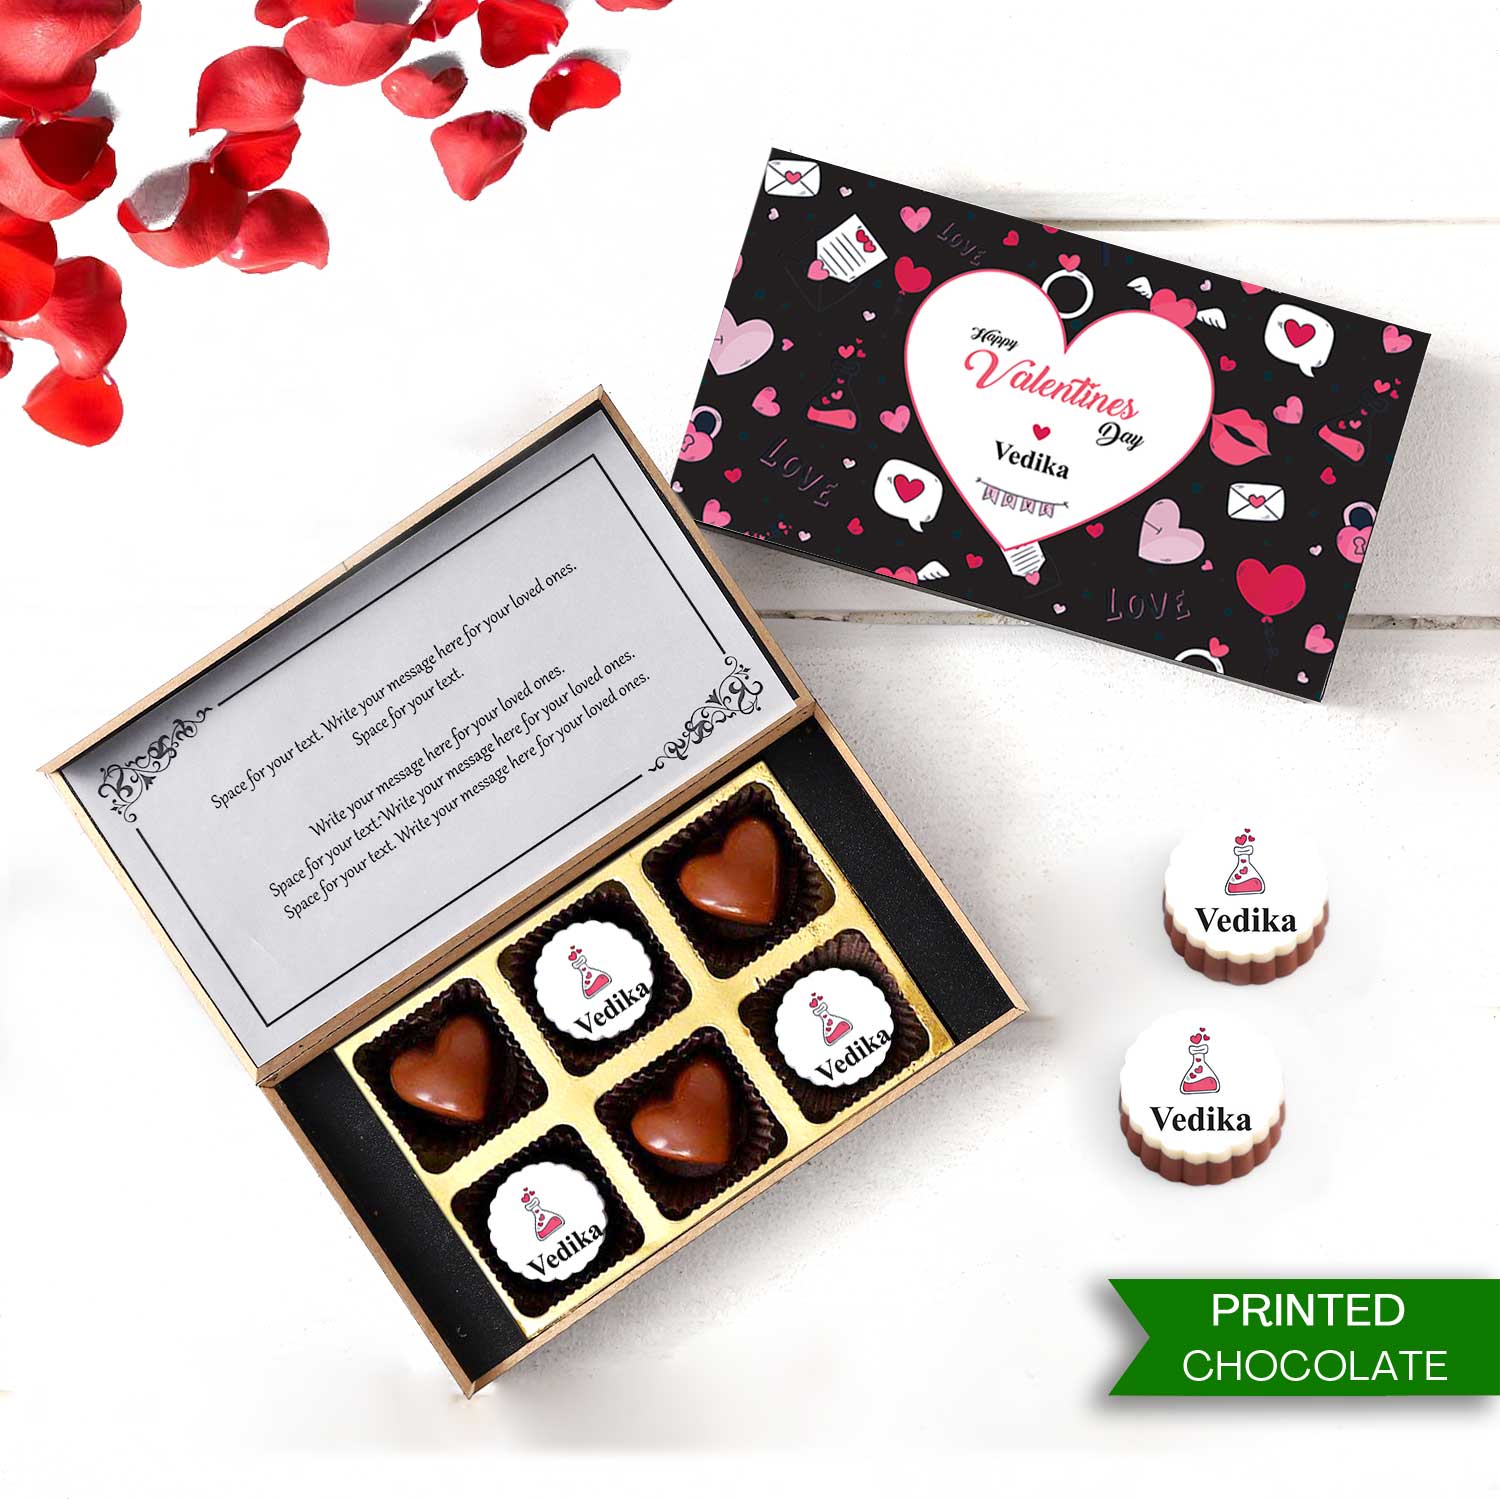 Lovey Dovey Valentine Special Personalised Chocolate Box